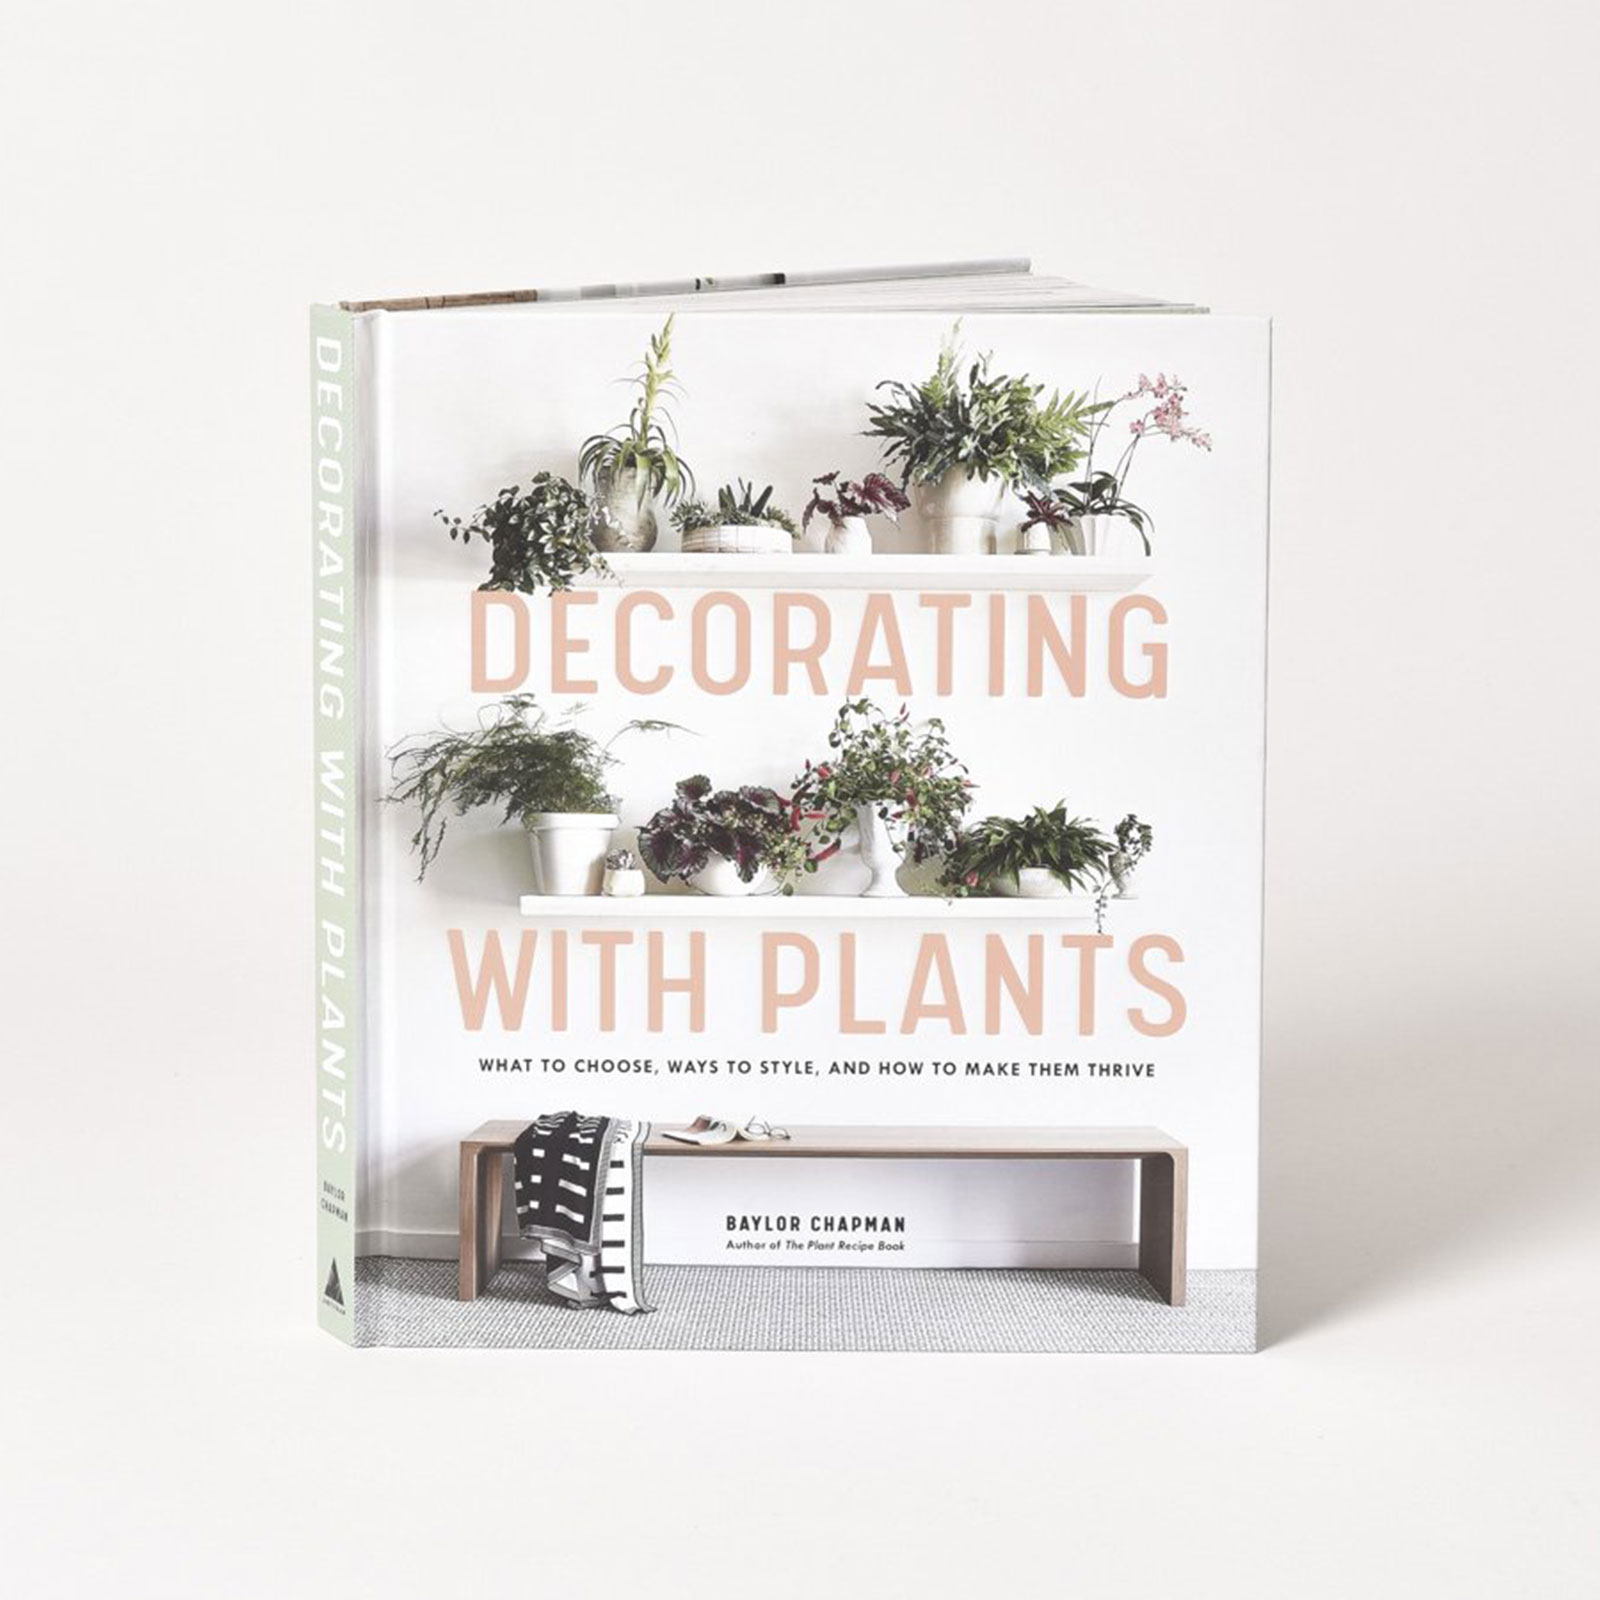 Decorating with Plants: What to Choose, Ways to Style, and How to Make Them Thrive Hardcover Book